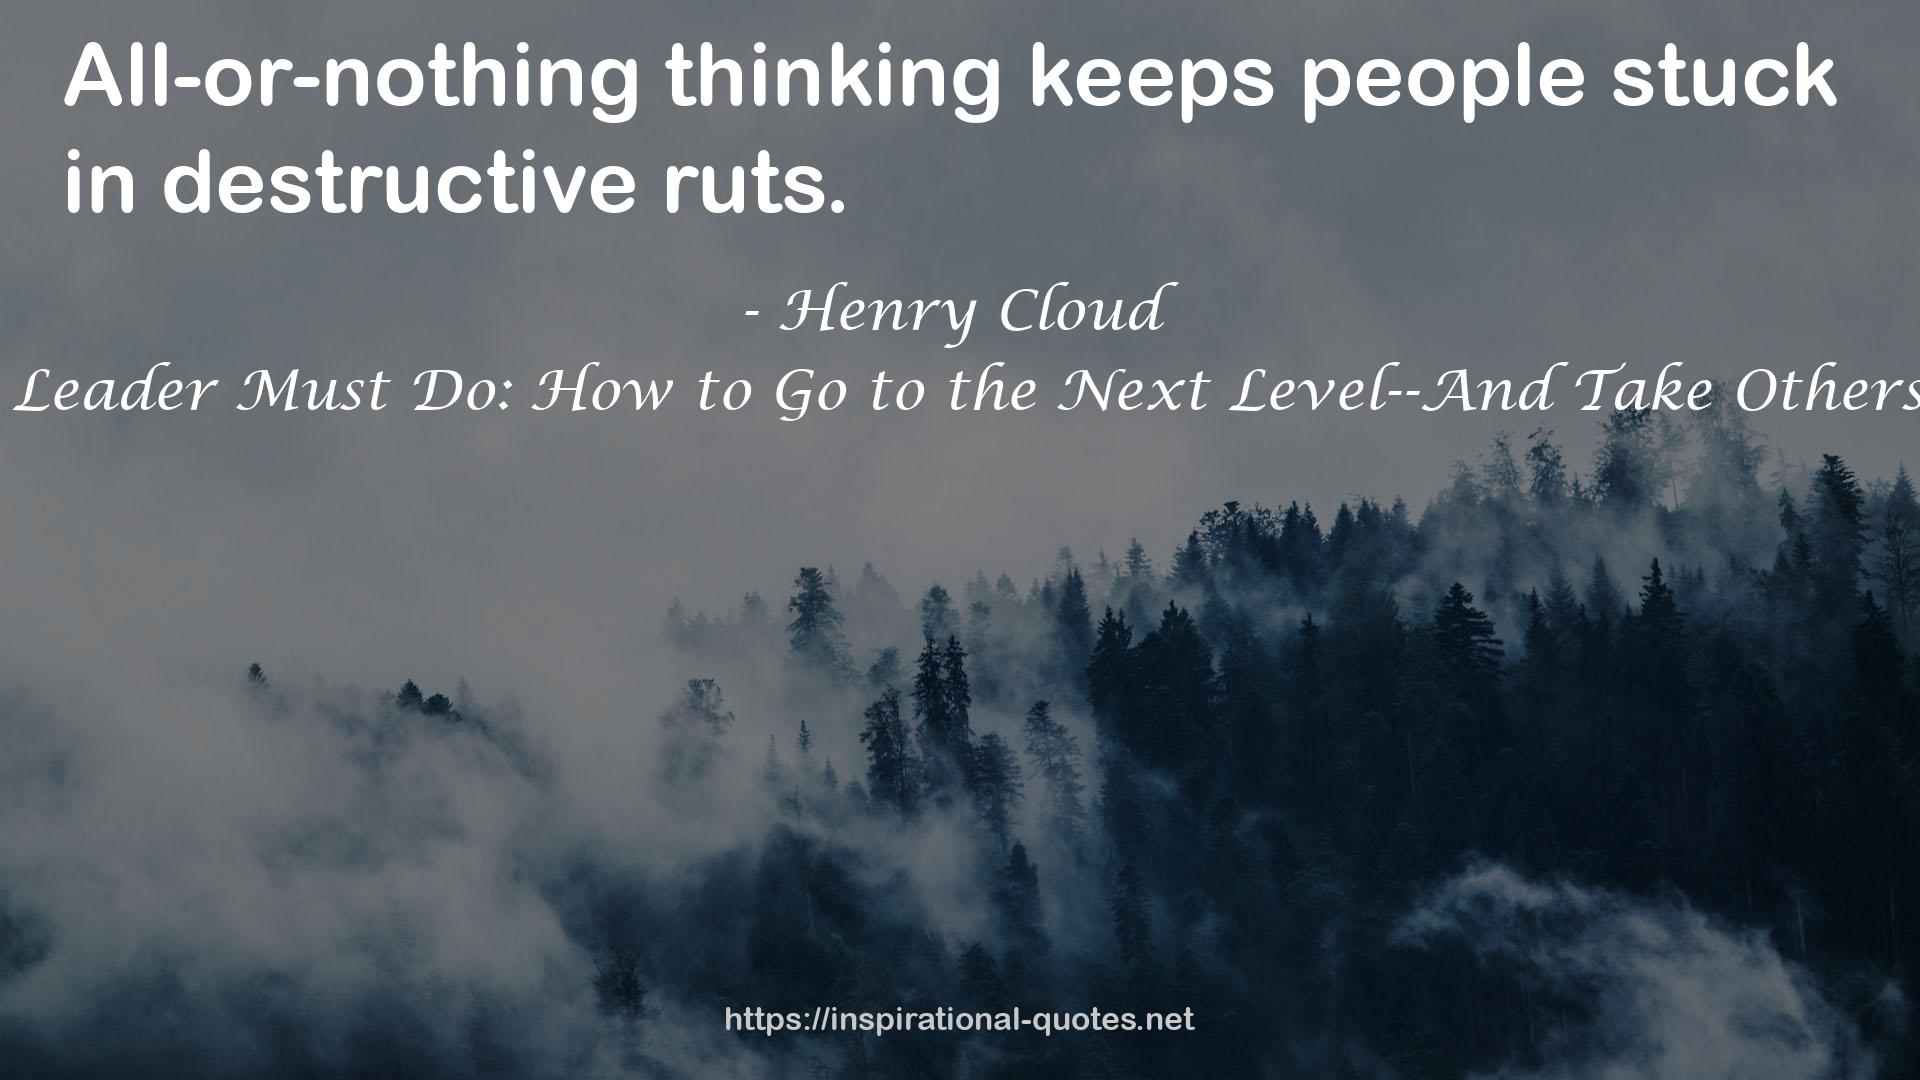 9 Things a Leader Must Do: How to Go to the Next Level--And Take Others With You QUOTES